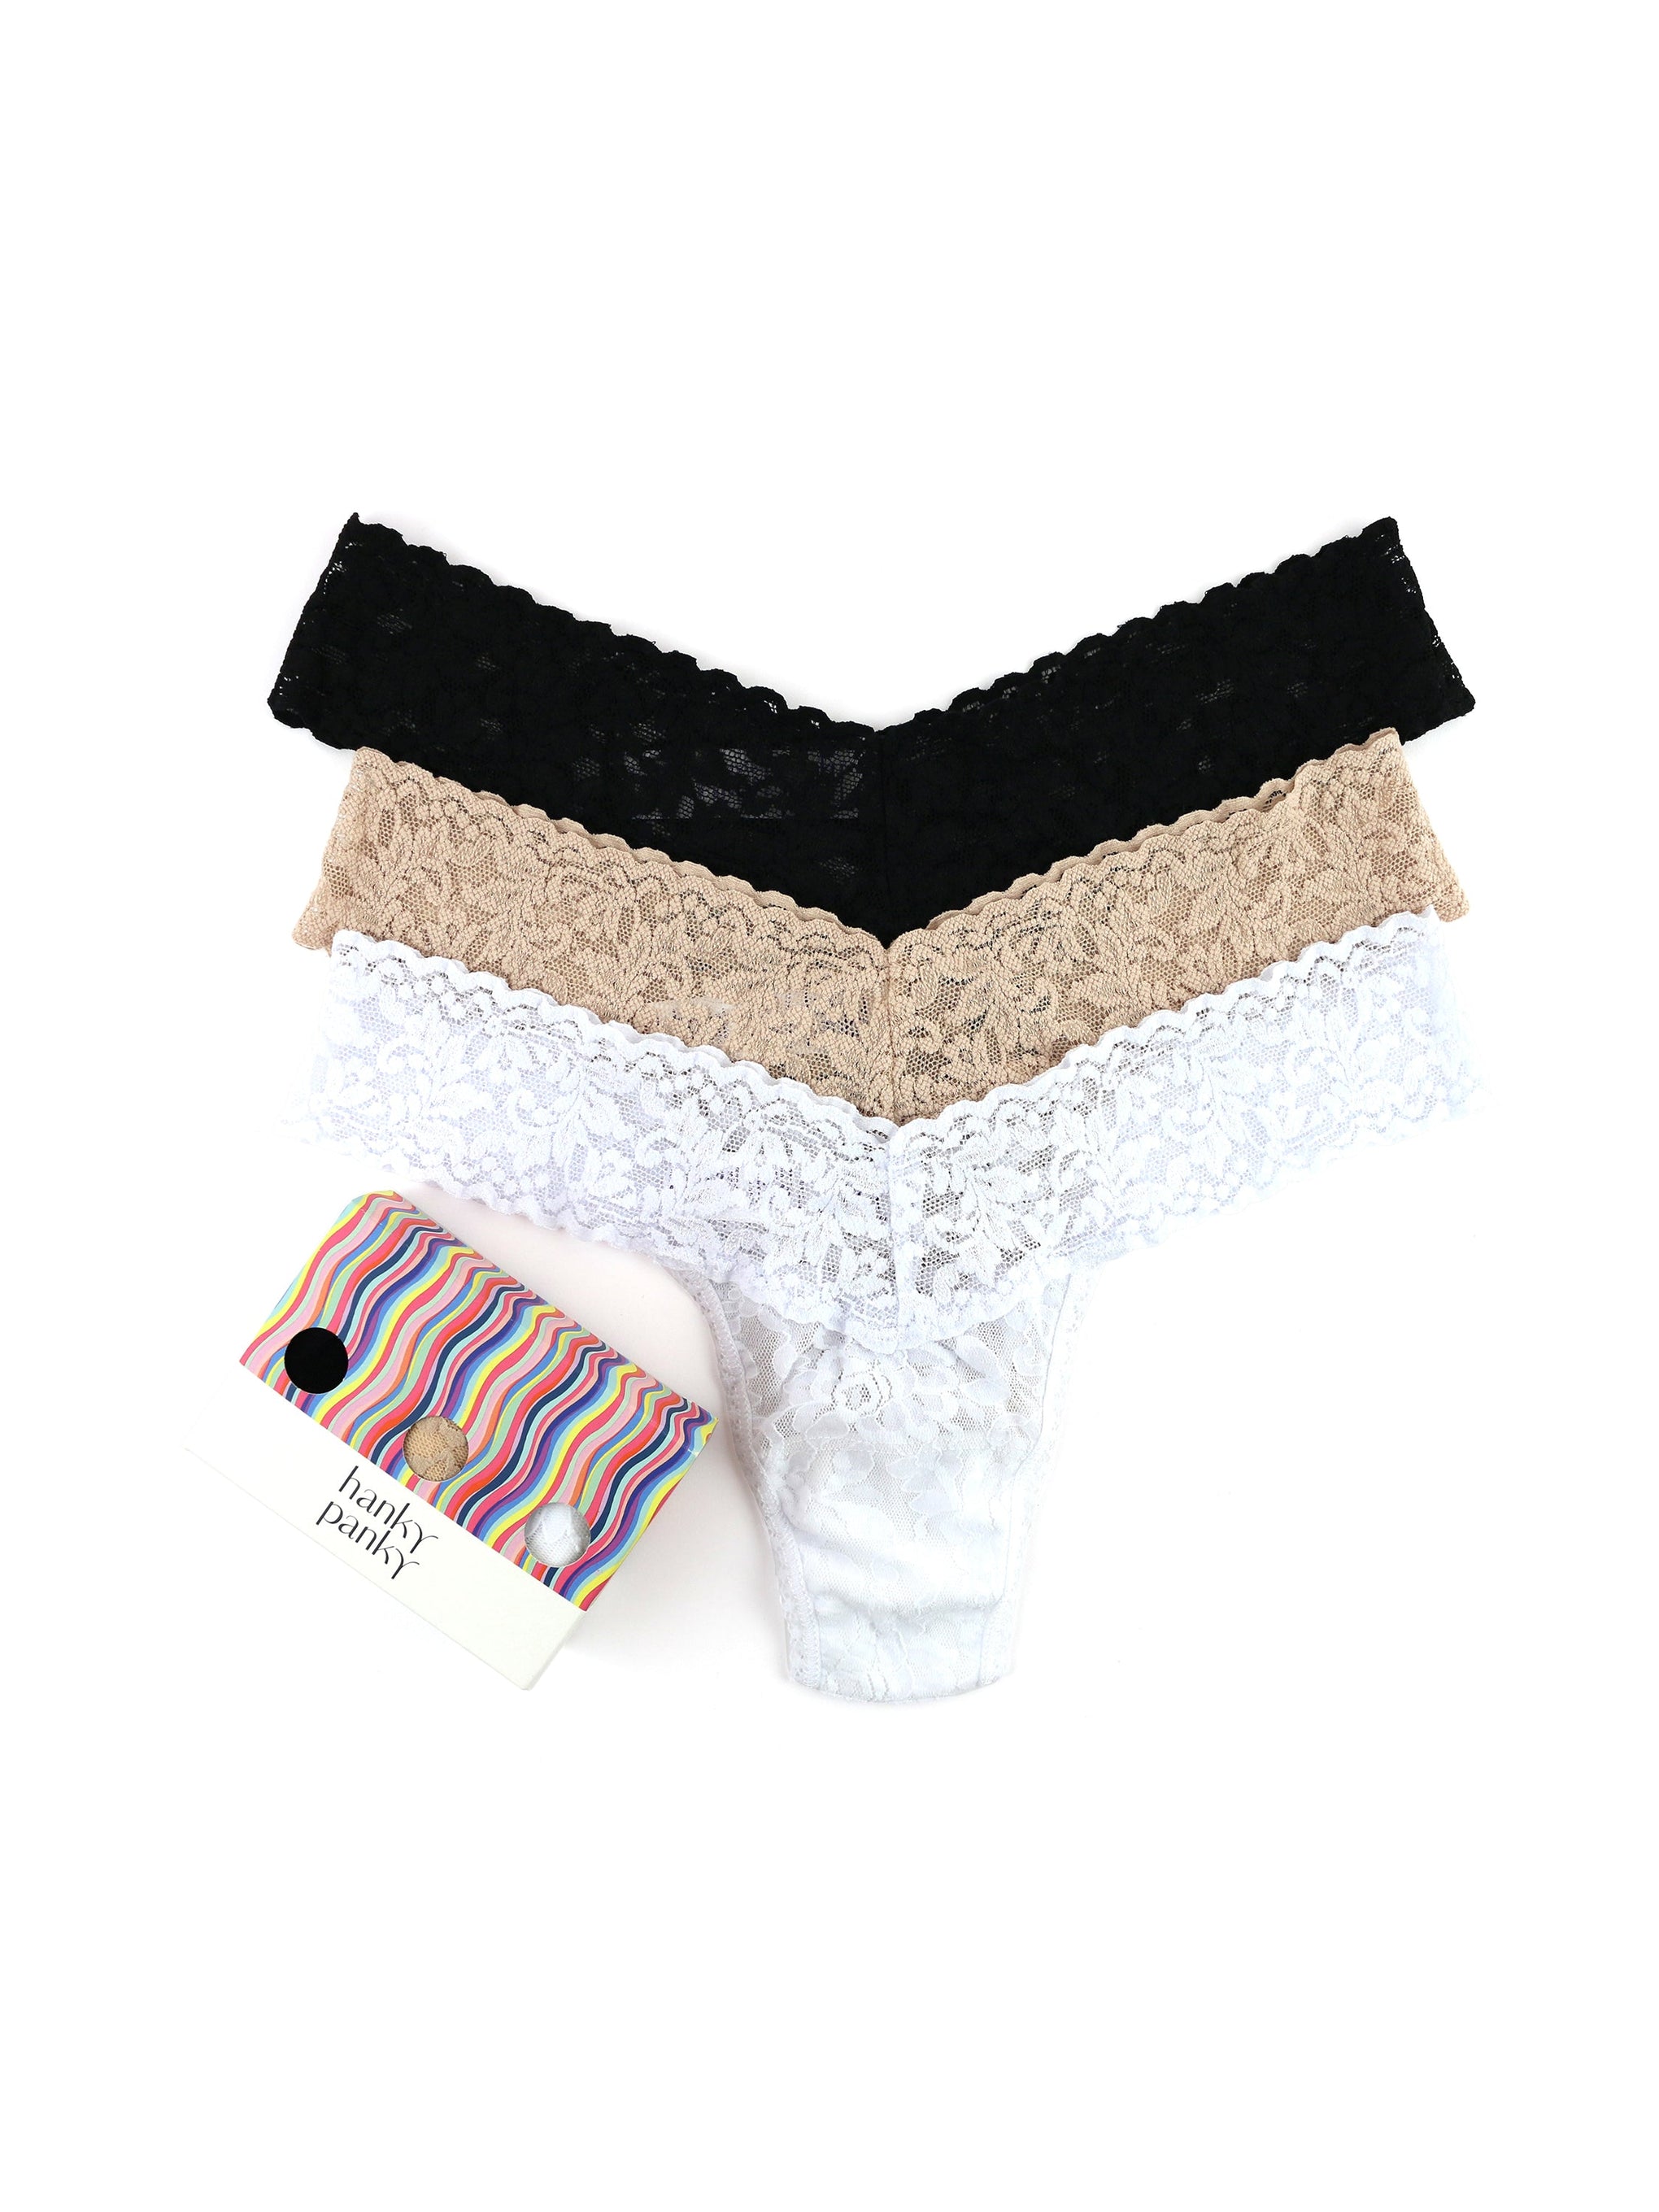 Buy Black/White High Rise Lace Knickers 2 Pack from Next USA